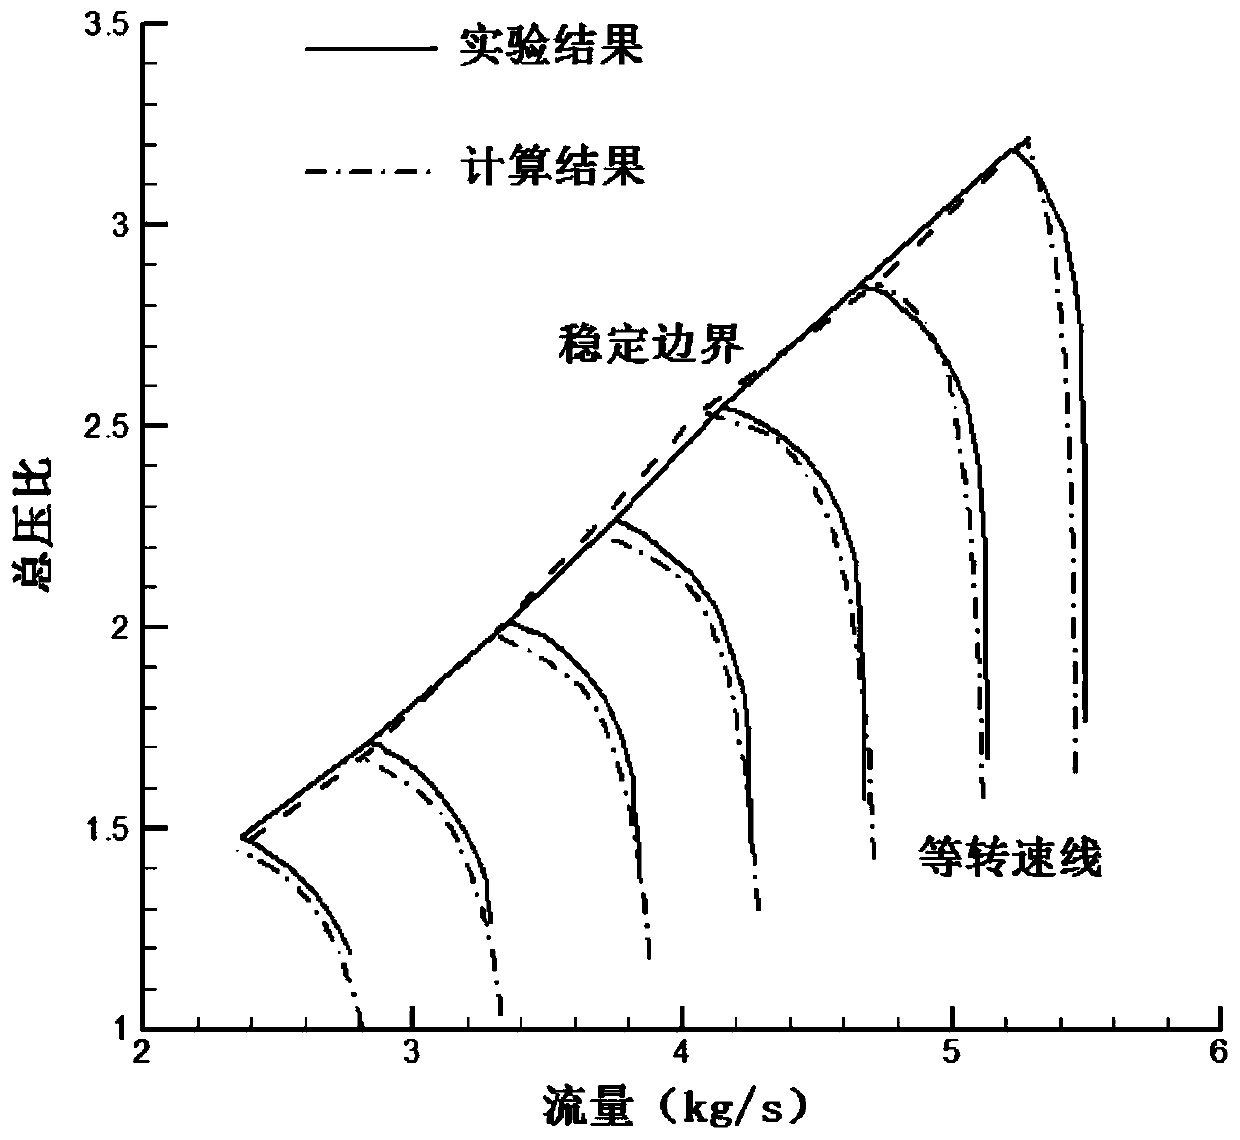 A compressor stability boundary judgment method considering the influence of intake total pressure distortion